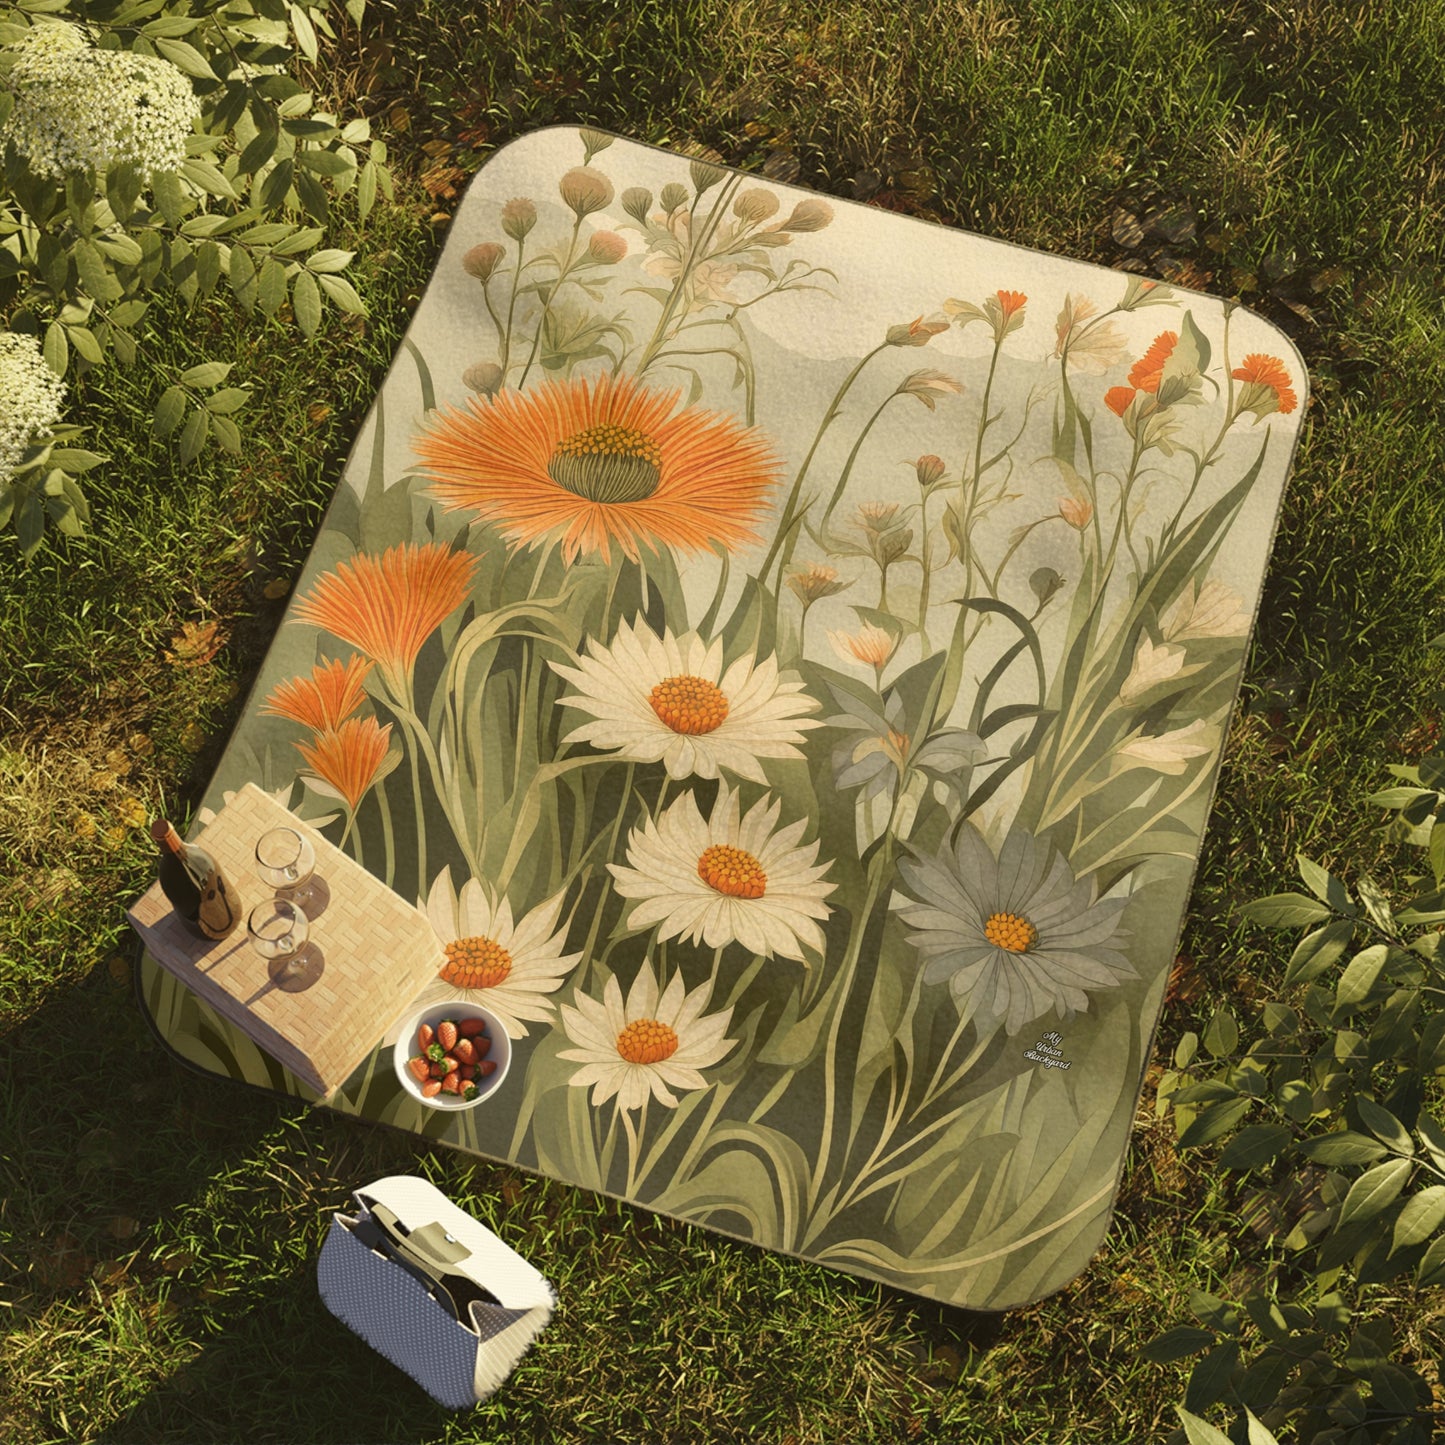 Outdoor Picnic Blanket with Soft Fleece Top and Water-Resistant Bottom - Daisy Wildflowers